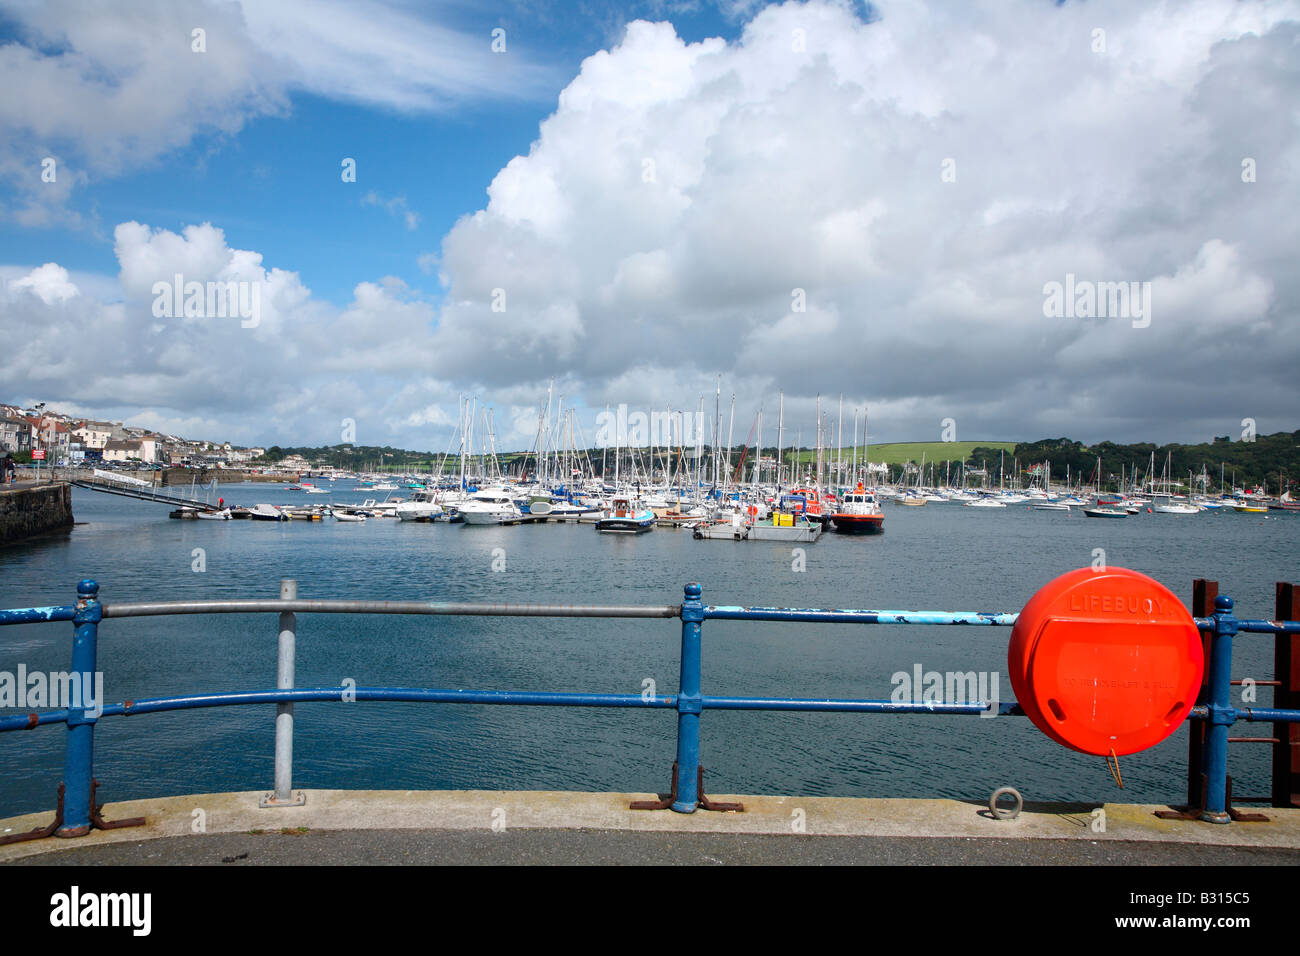 Looking at Boats moored on the Fal river in Falmouth, Cornwall UK Stock Photo